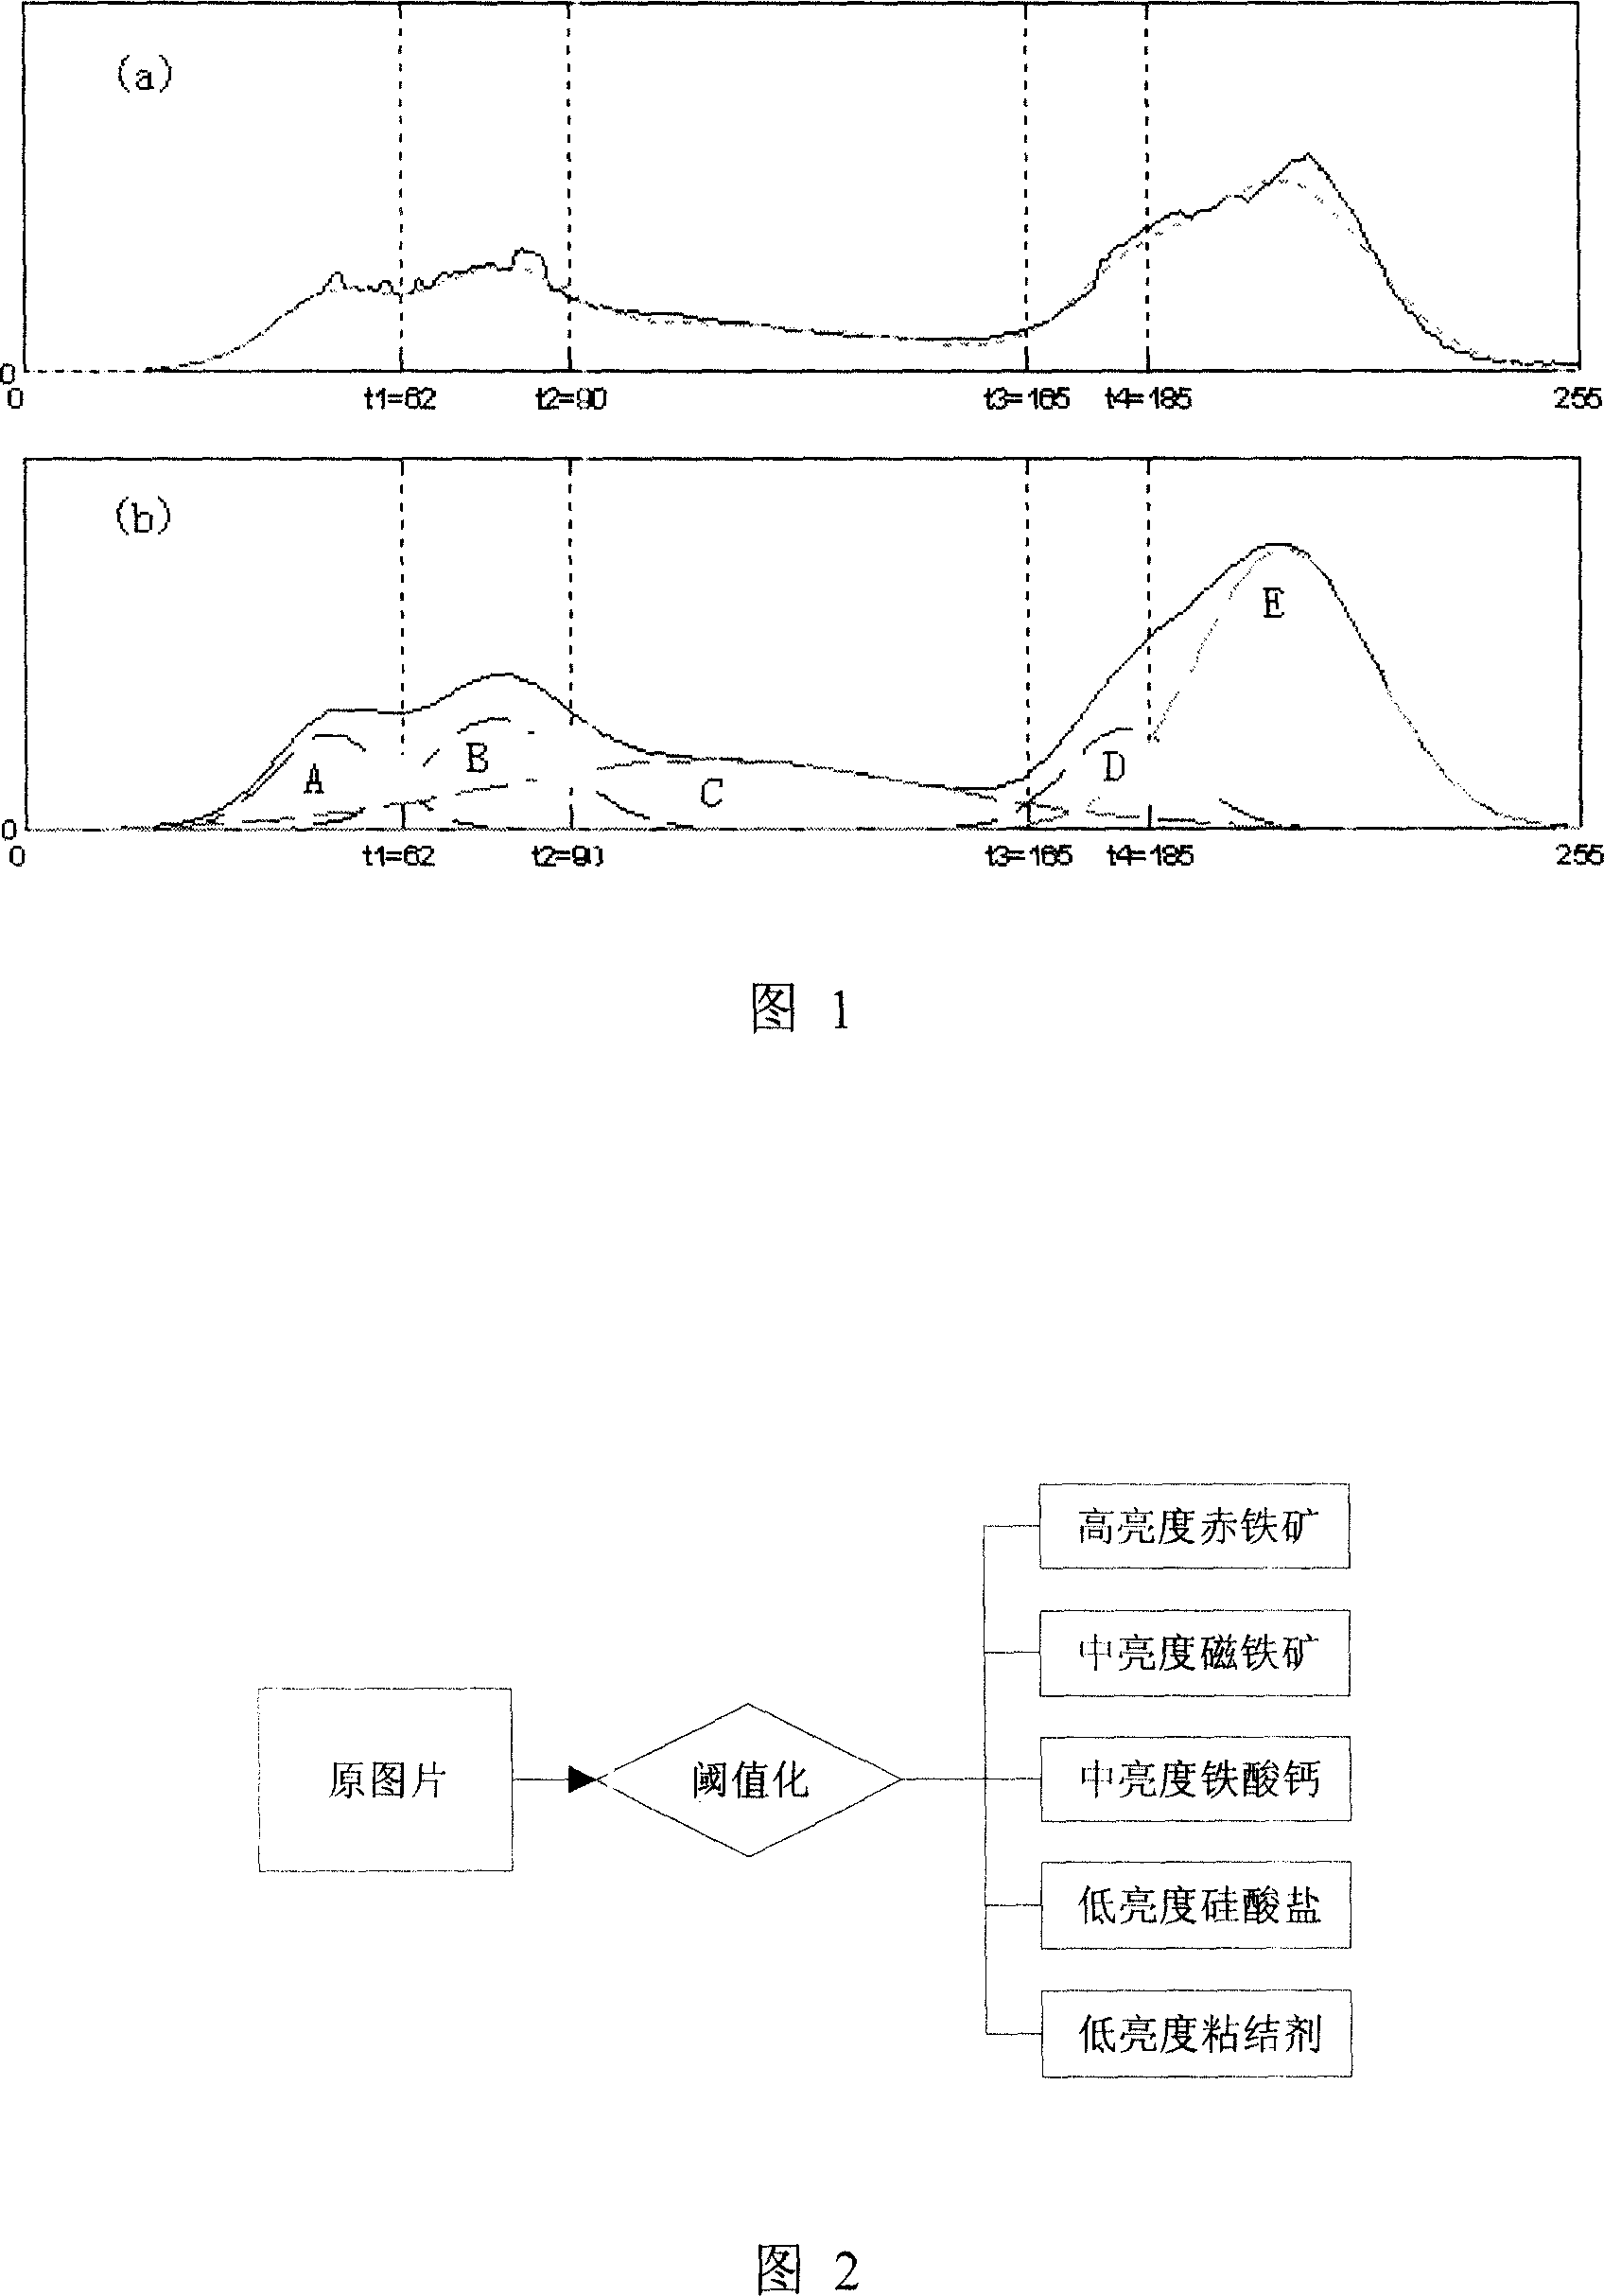 Automatic recognition method for sintered ore essential mineral phase